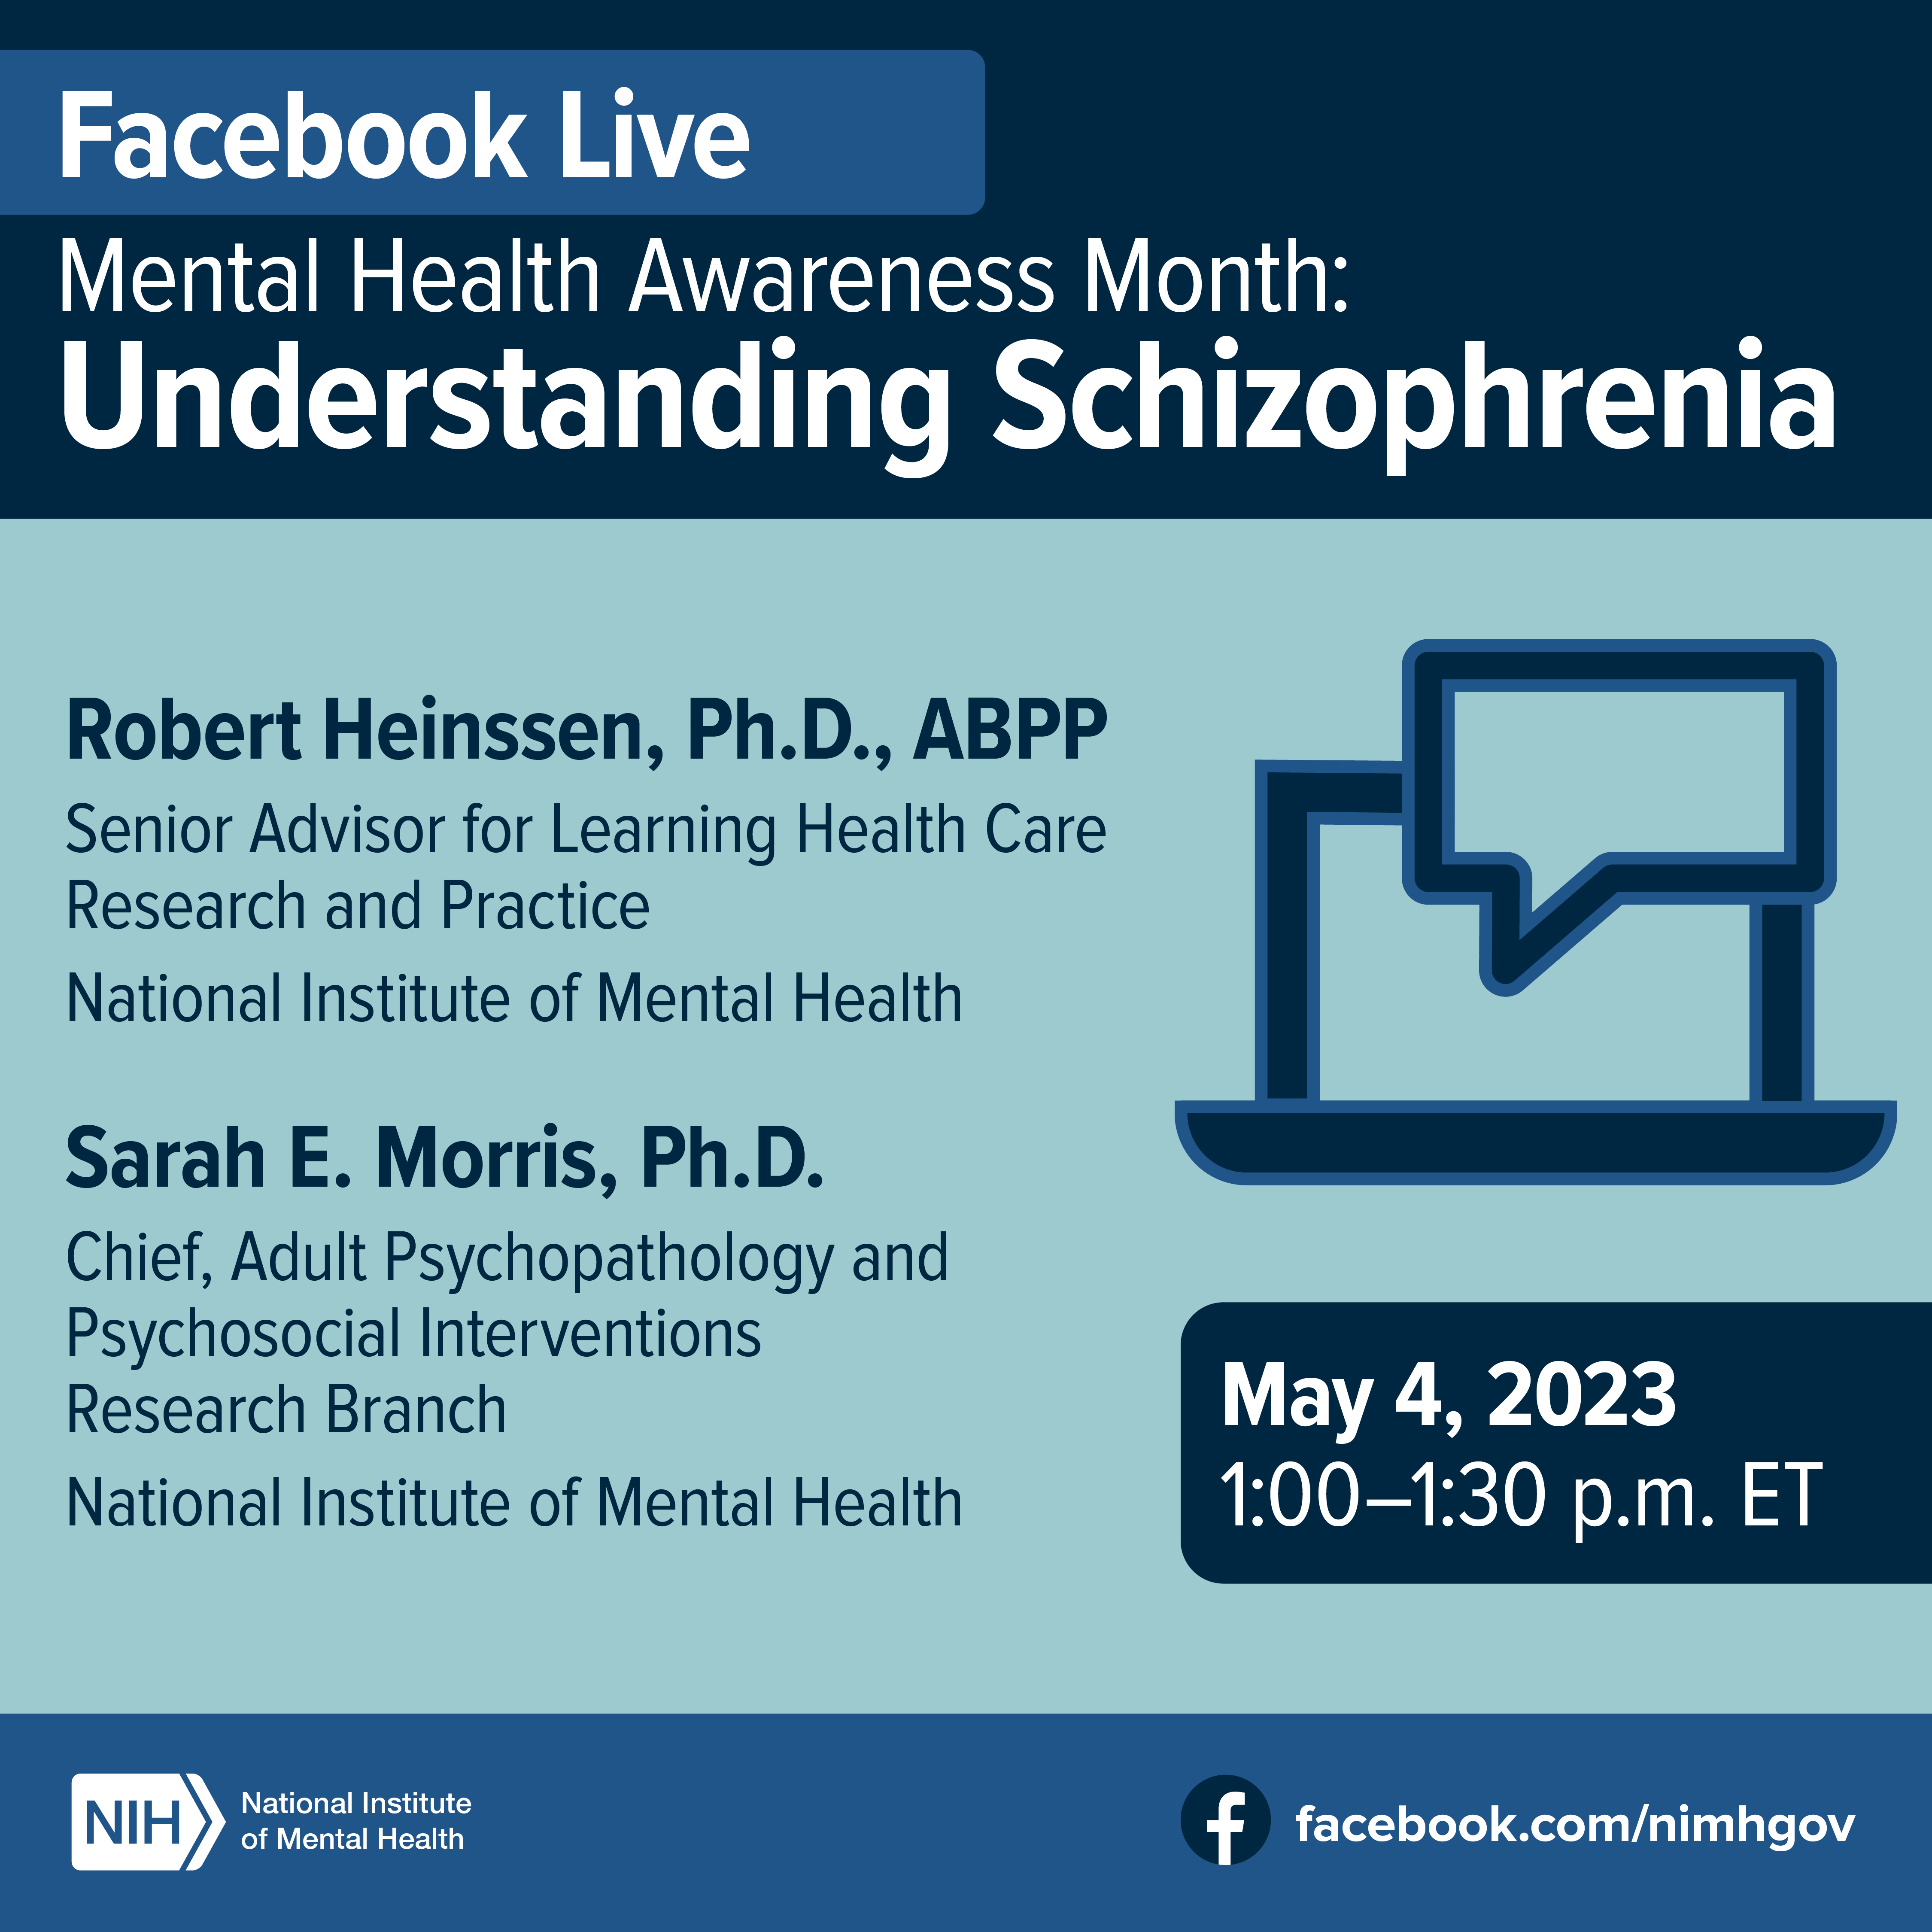 Facebook Live Mental Health Awareness Month: Understanding Schizophrenia: Robert Heinssen, Ph.D., ABPP, Senior Advisor for Learning Health Care Research and Practice, National Institute of Mental Health Sarah E. Morris, Ph.D., chief of the Adult Psychopathology and Psychosocial Interventions Research Branch, National Institute of Mental Health. May 4, 2023, 1:00-1:30 p.m. ET. Points to facebook.com/nimhgov